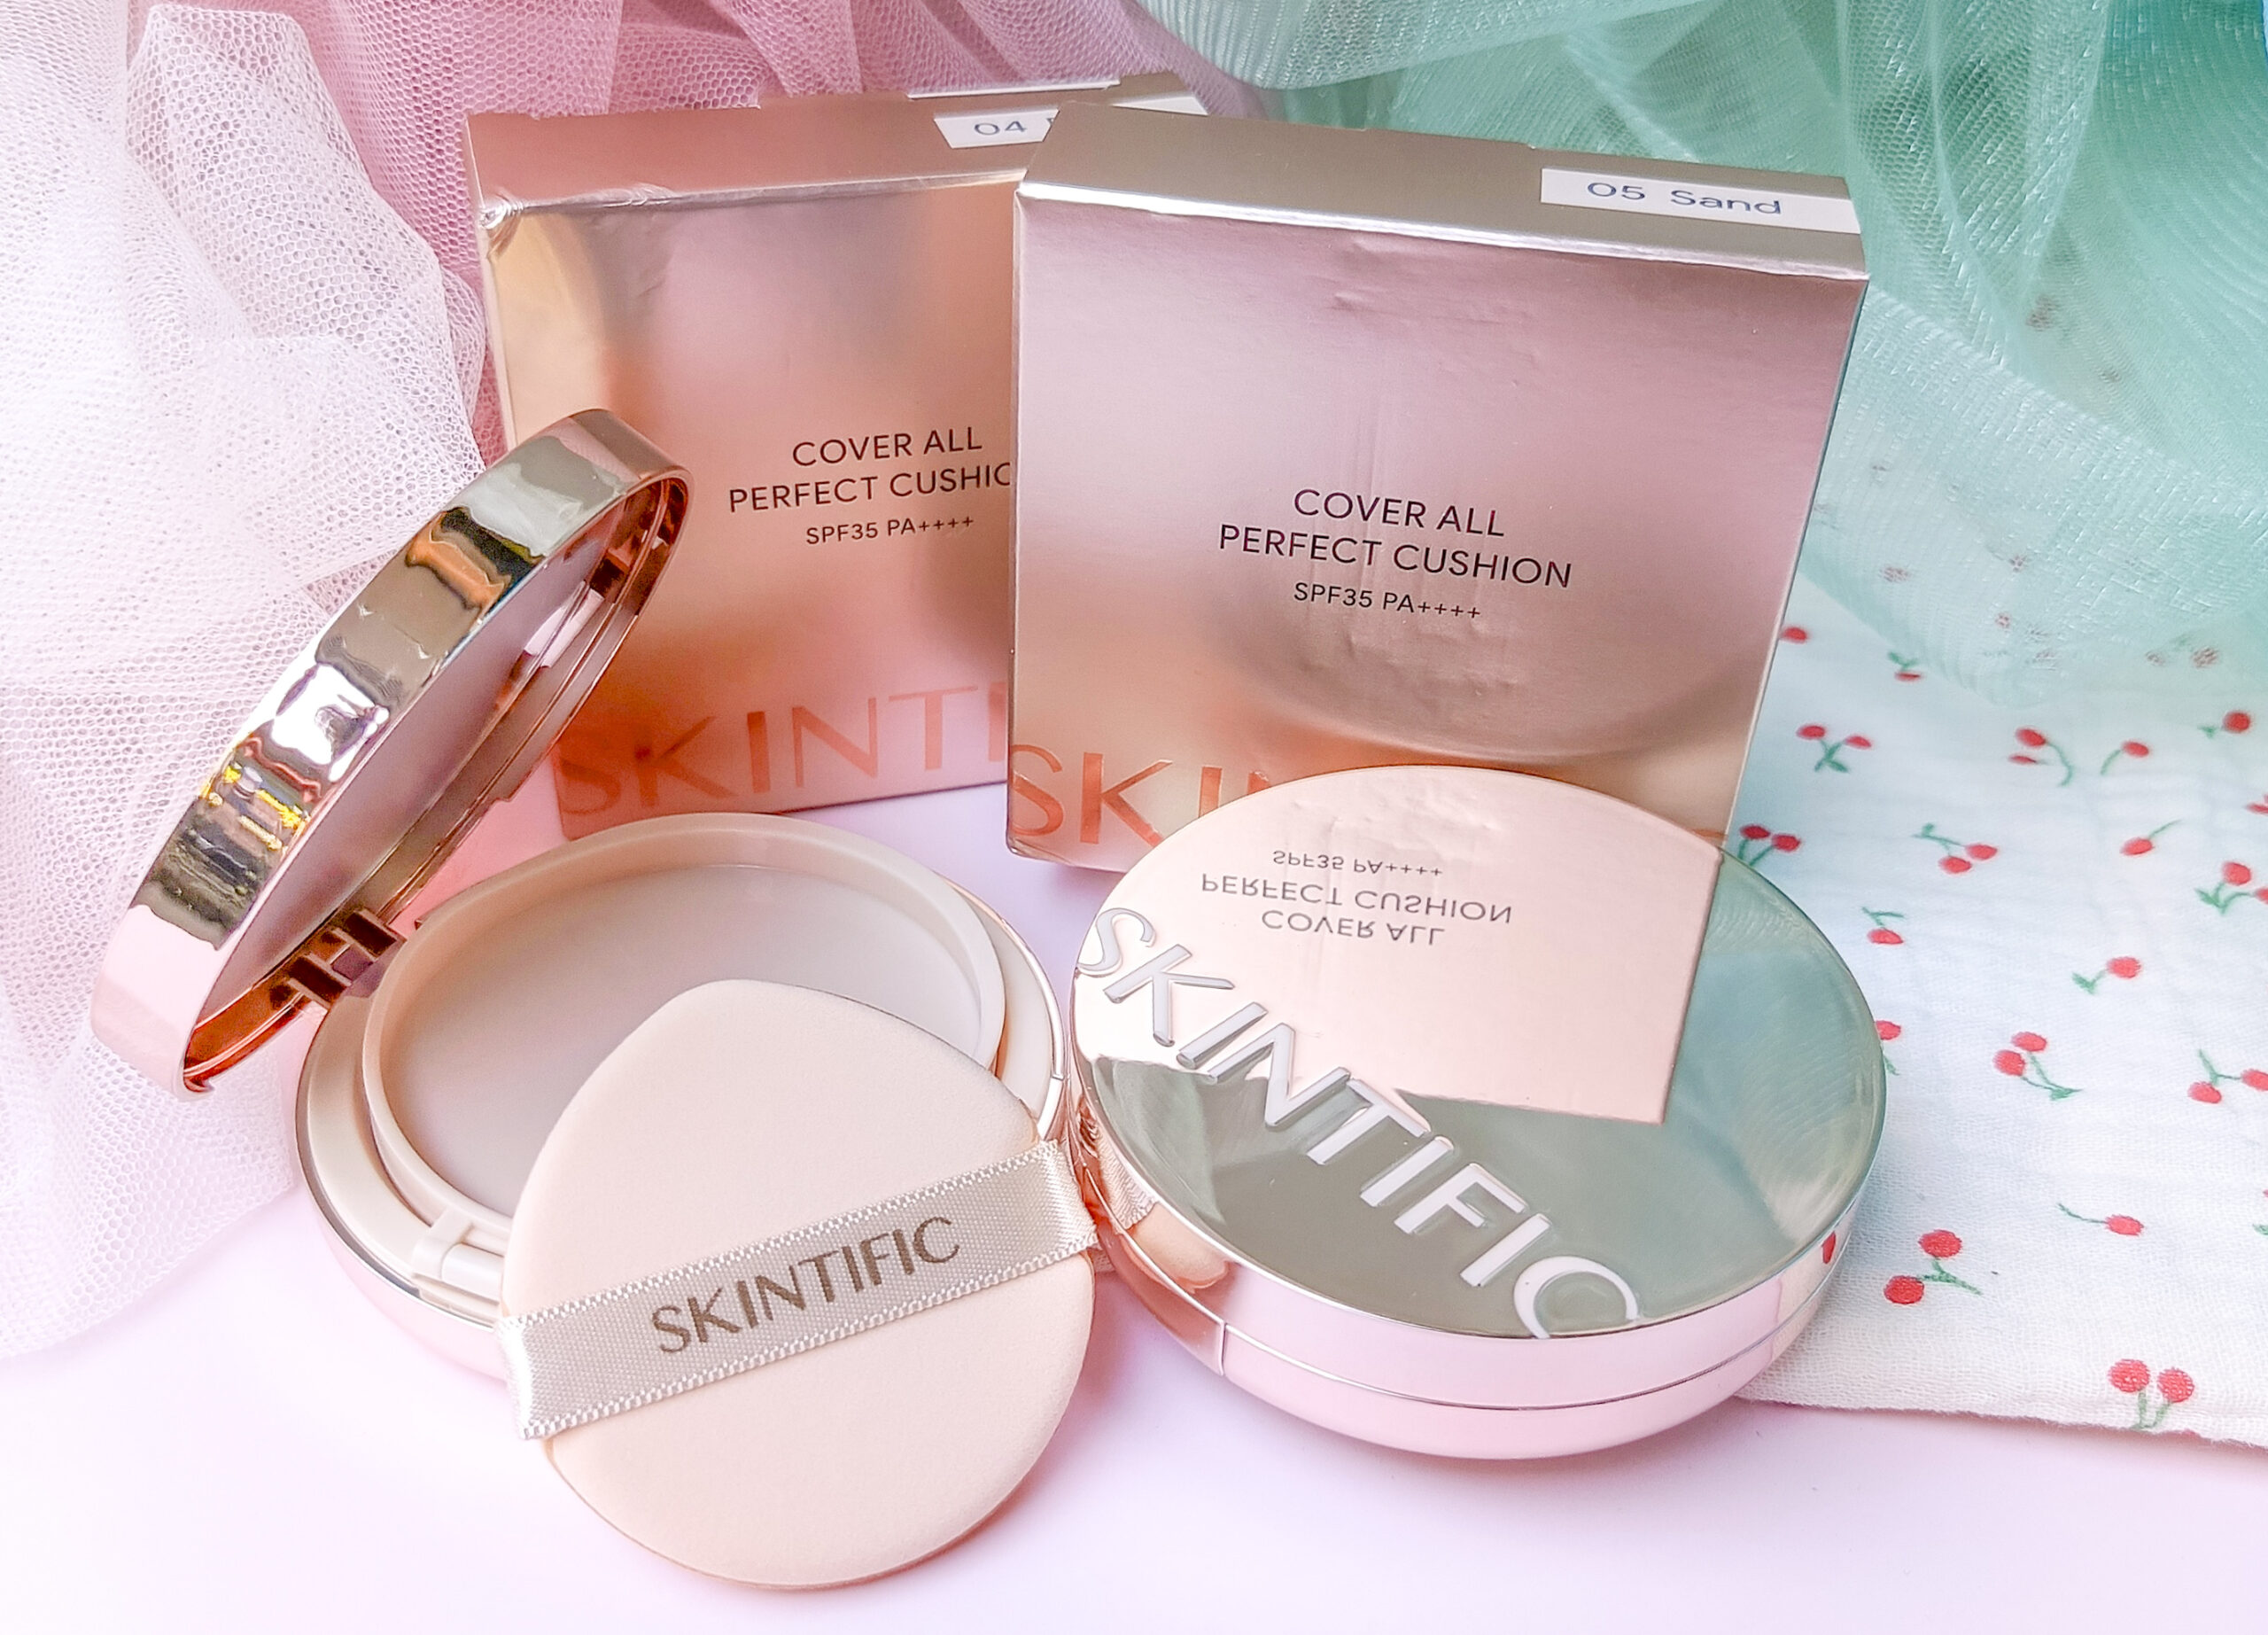 Skintific Cover All Perfect Cushion Philippines